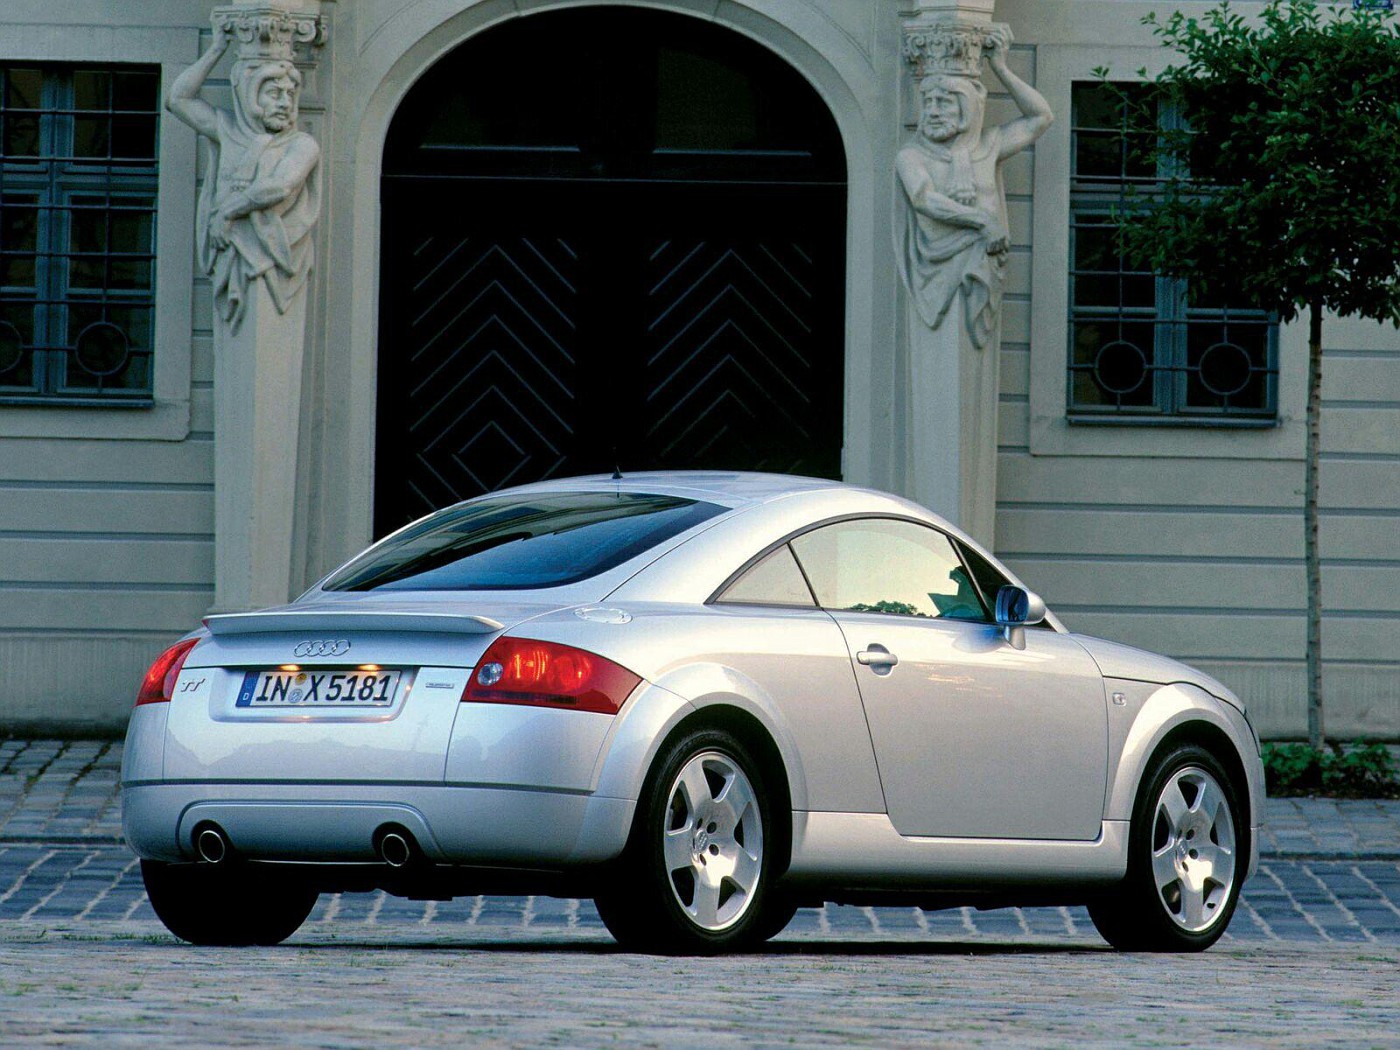 The TT Gallery. The largest Audi TT Gallery on the Web, with Audi TT Picture, Audi TT Wallpaper, etc